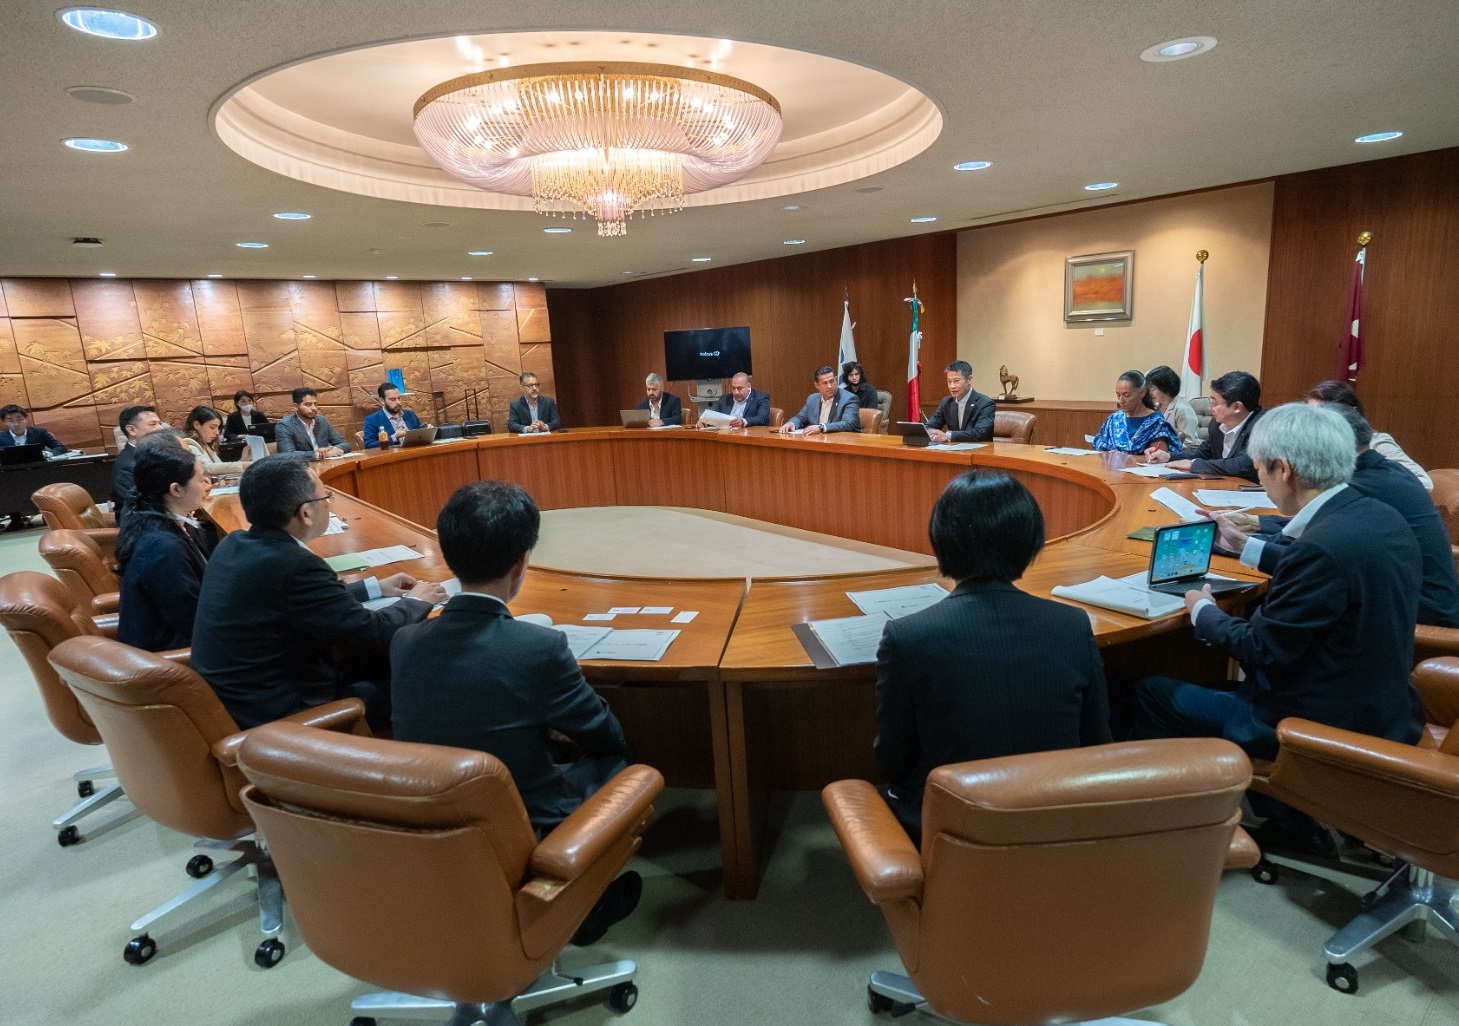 Governor of Hiroshima receives group